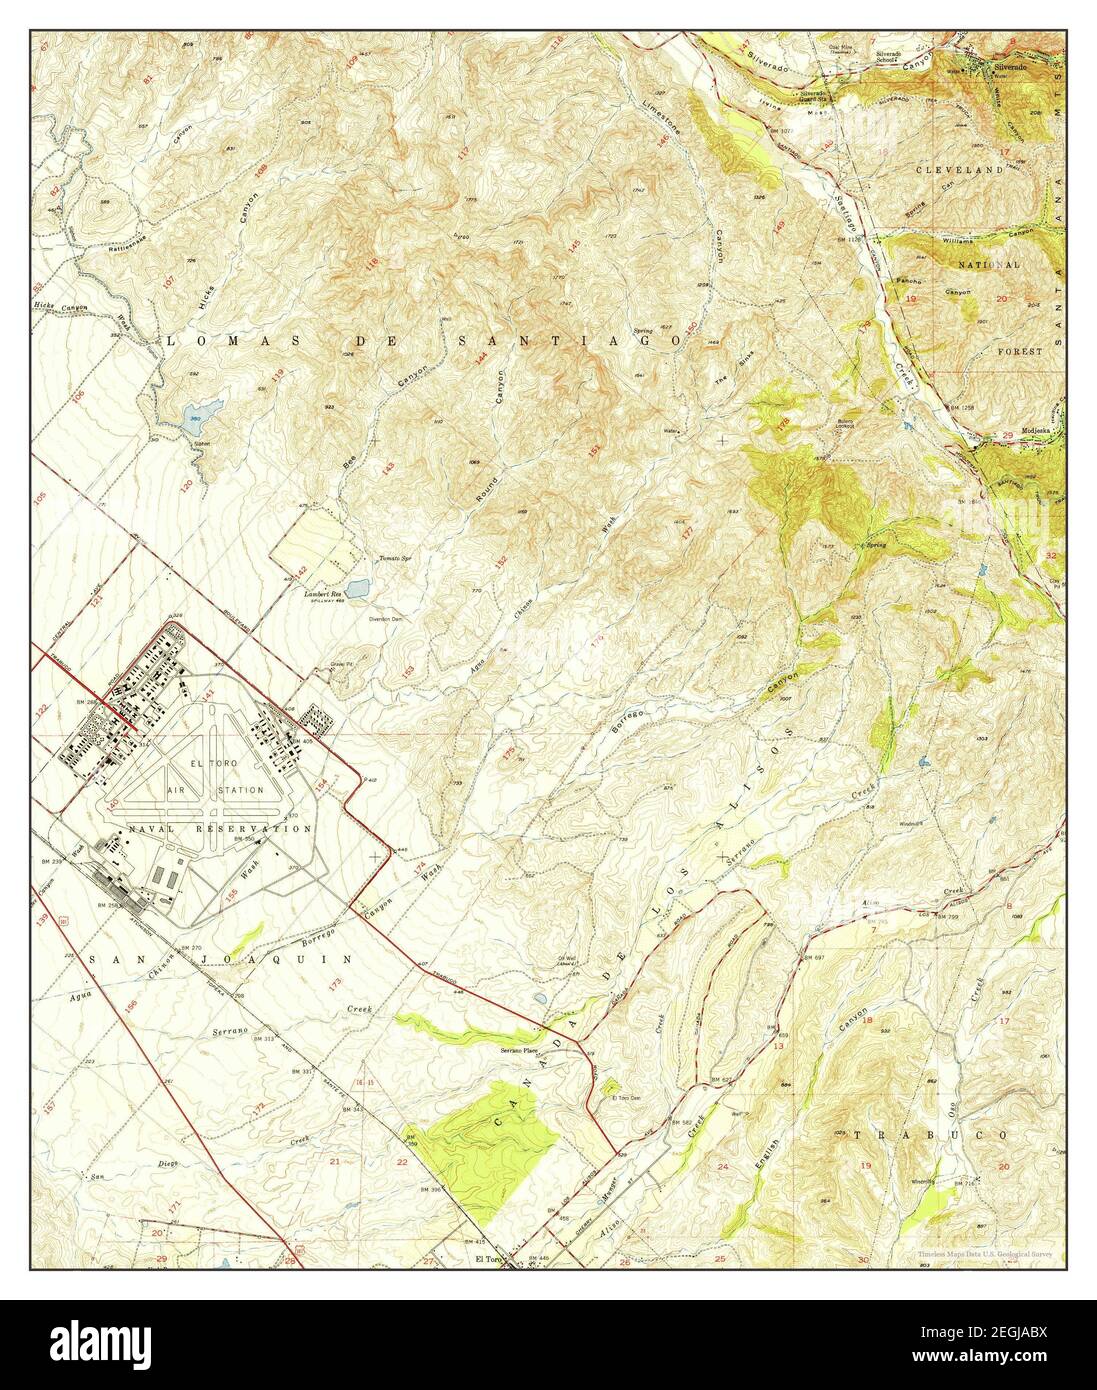 El Toro, California, map 1950, 1:24000, United States of America by Timeless Maps, data U.S. Geological Survey Stock Photo